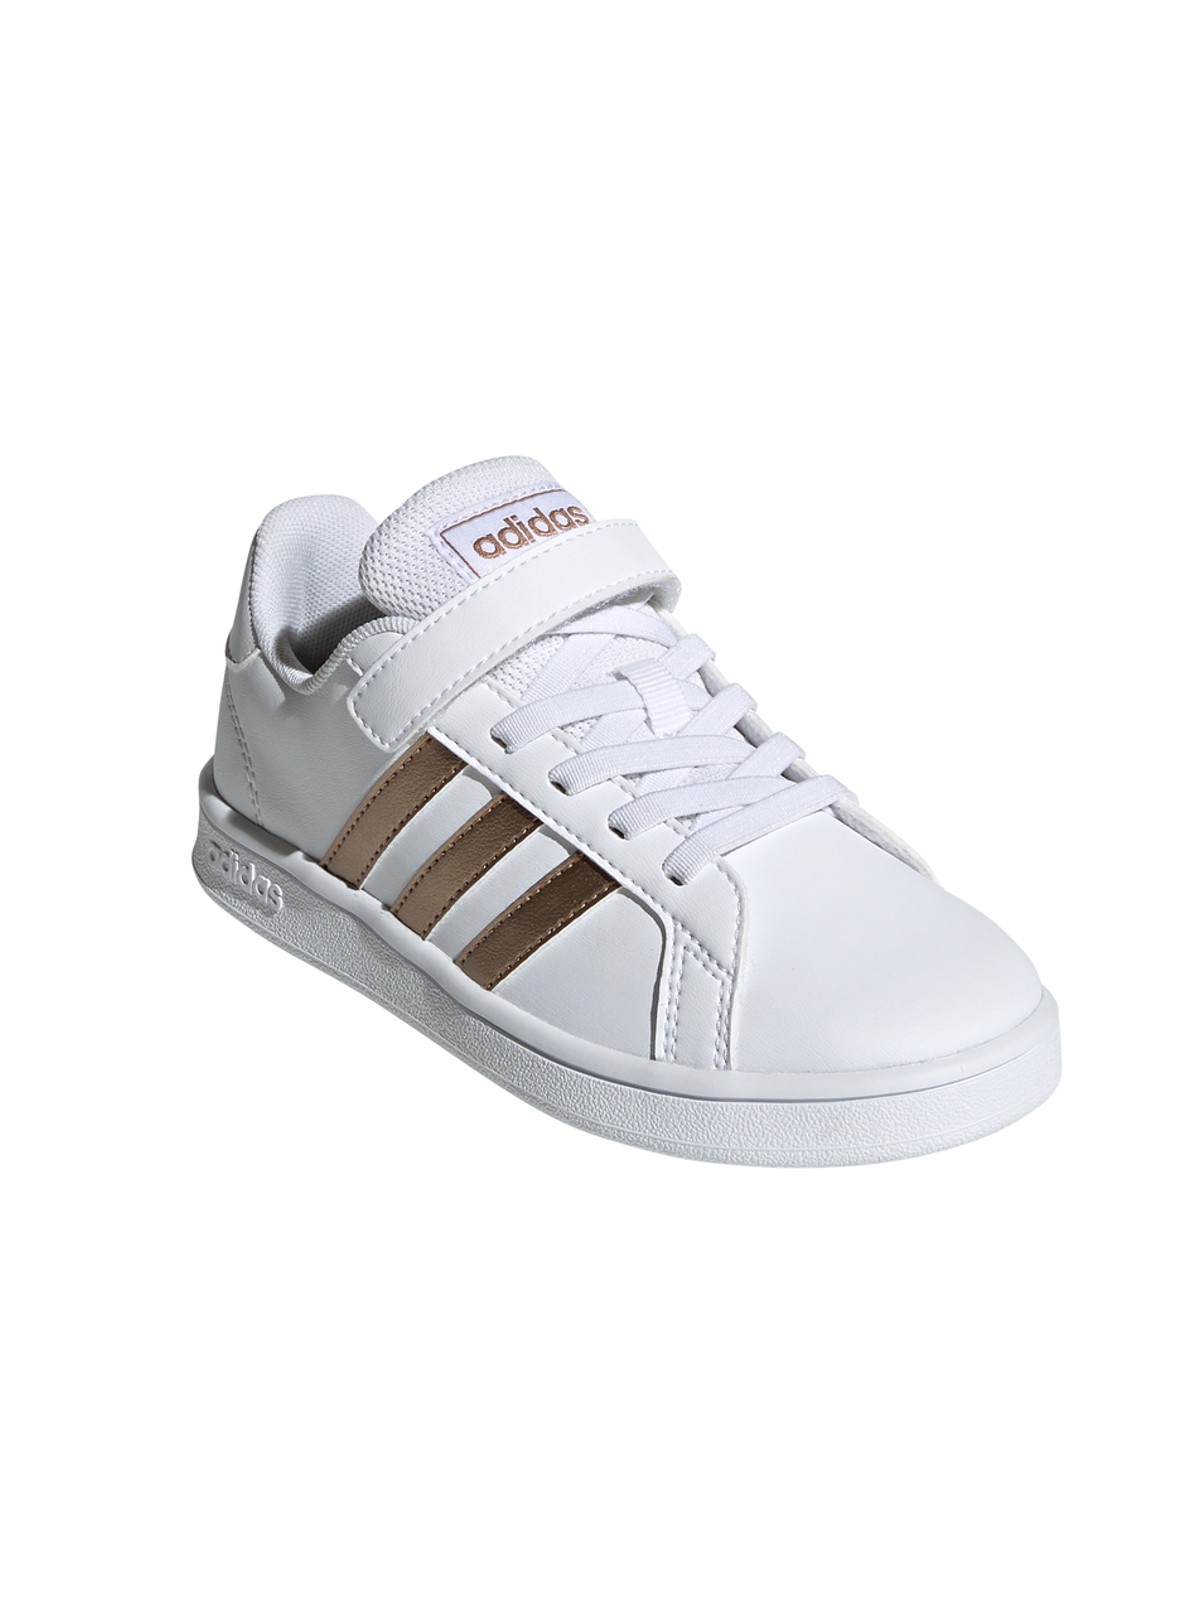 chaussures adidas ado fille